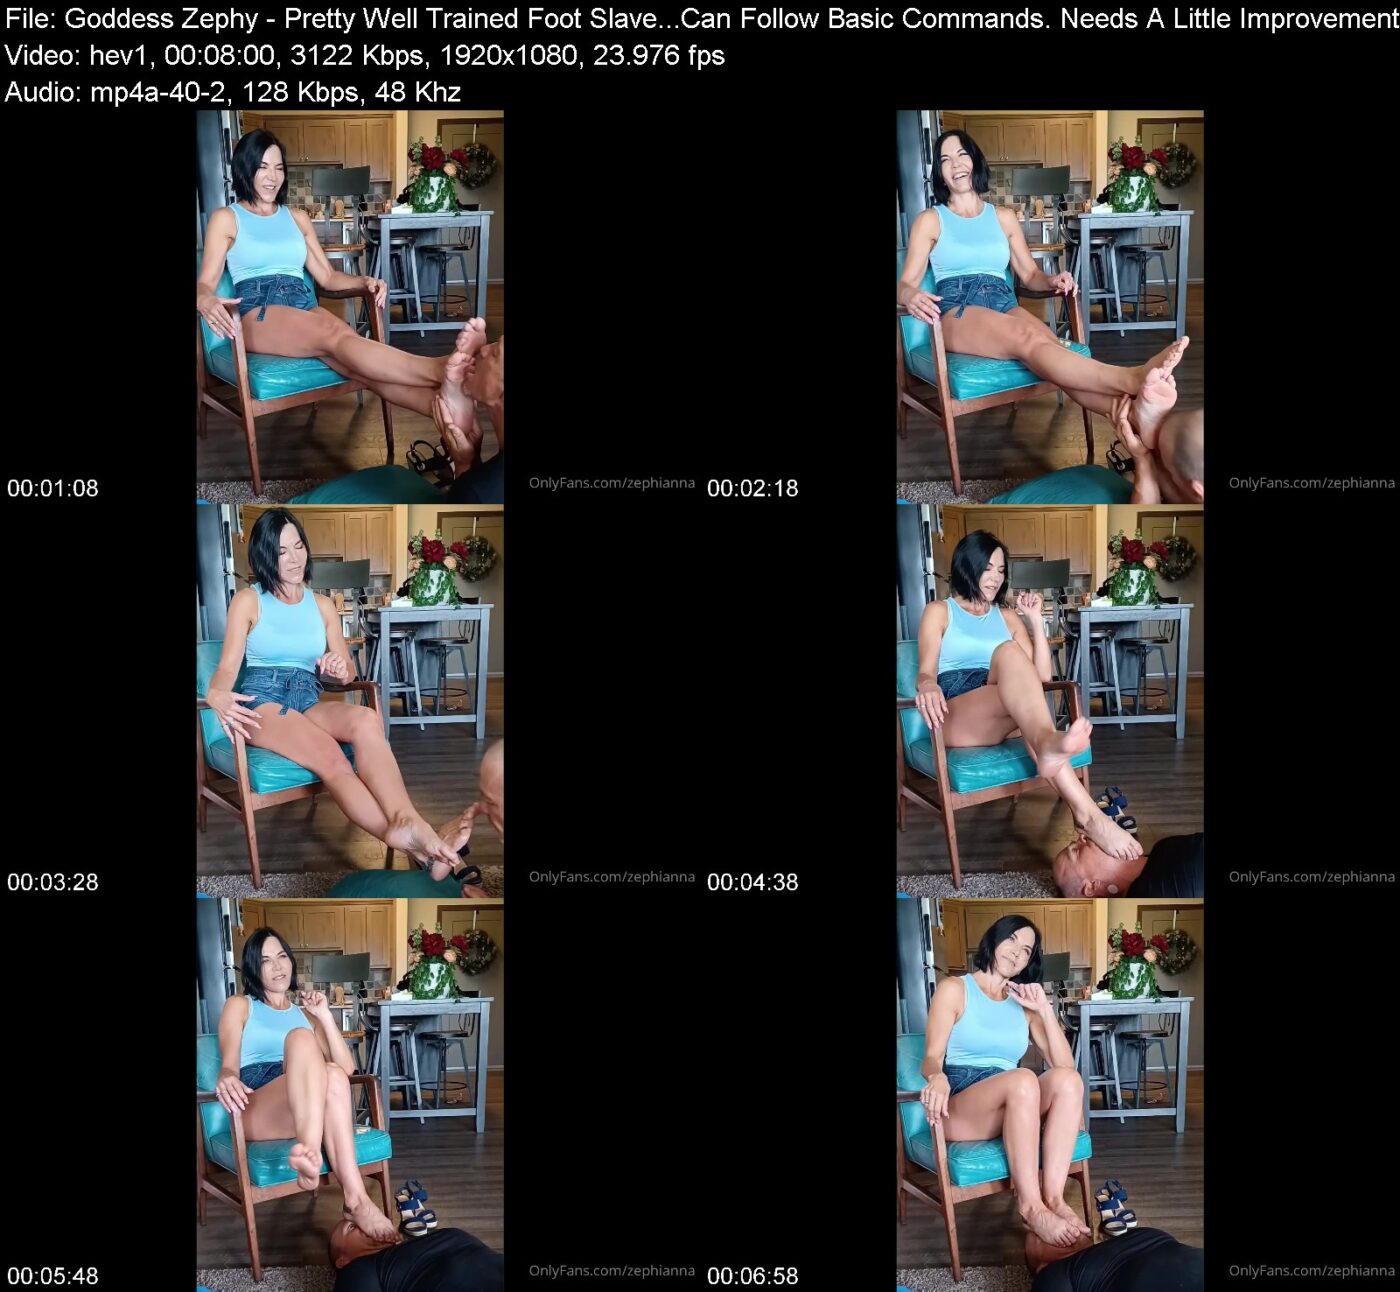 Actress: Goddess Zephy. Title and Studio: Pretty Well Trained Foot Slave…Can Follow Basic Commands. Needs A Little Improvement, But Don’t You All – 723